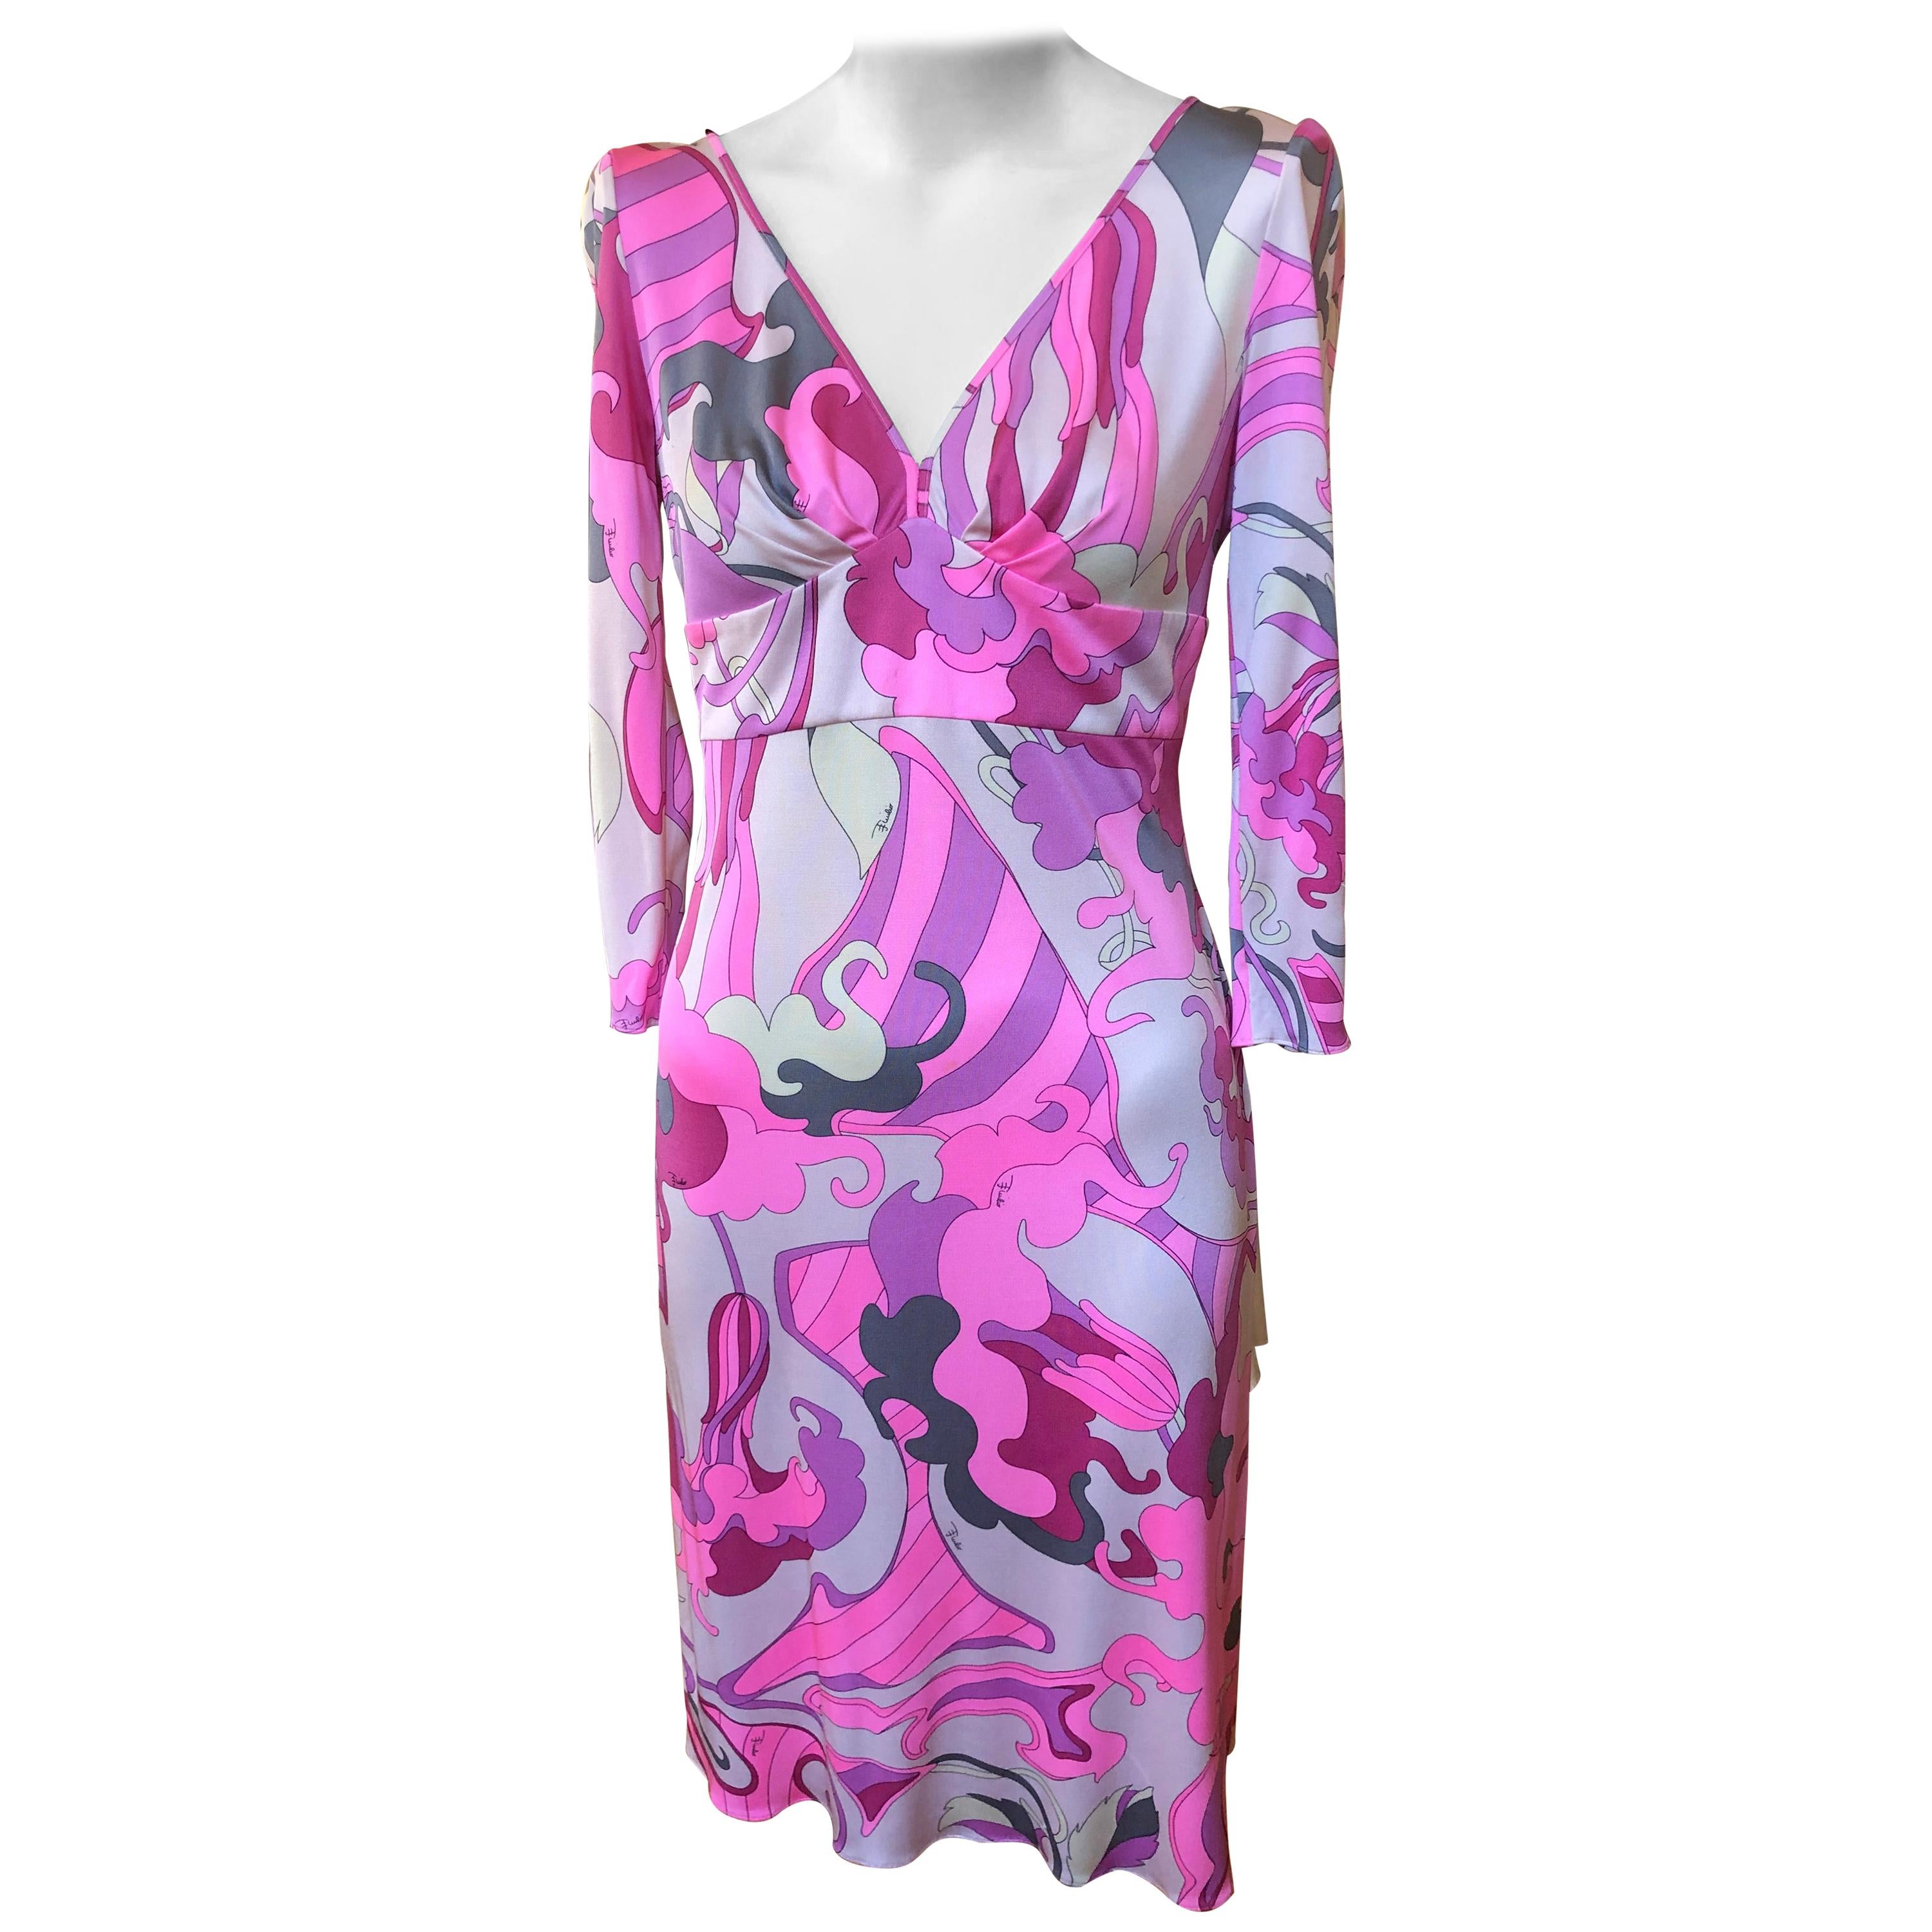 Emilio Pucci Silk Floral Print Dress with Low Back (44 ITL)